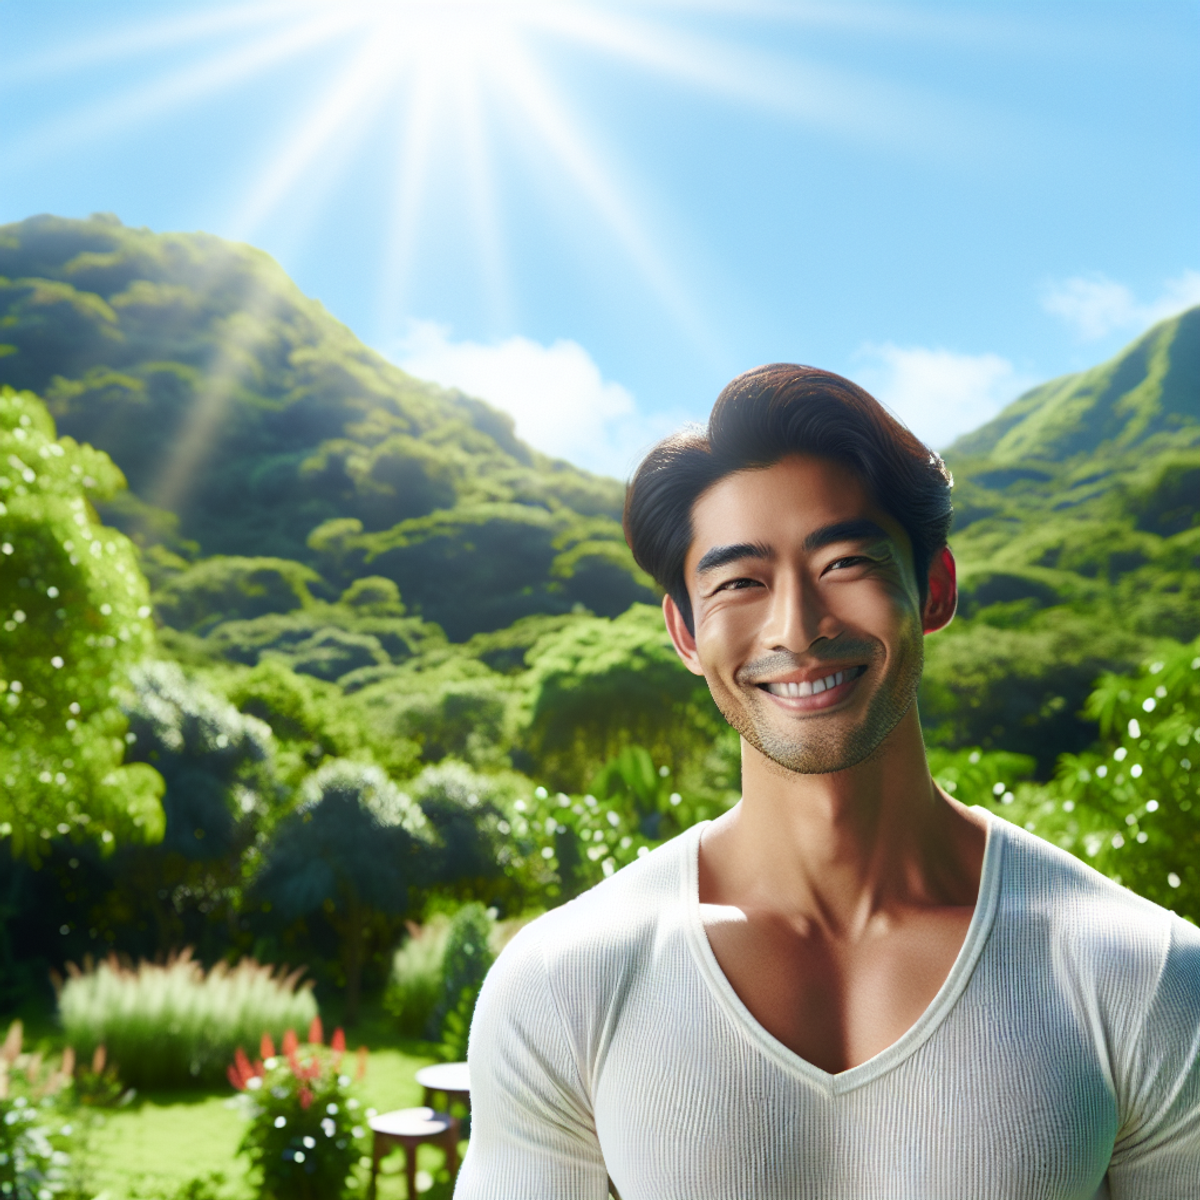 A Man Smiling in a lush, Sunny Outdoor Setting.